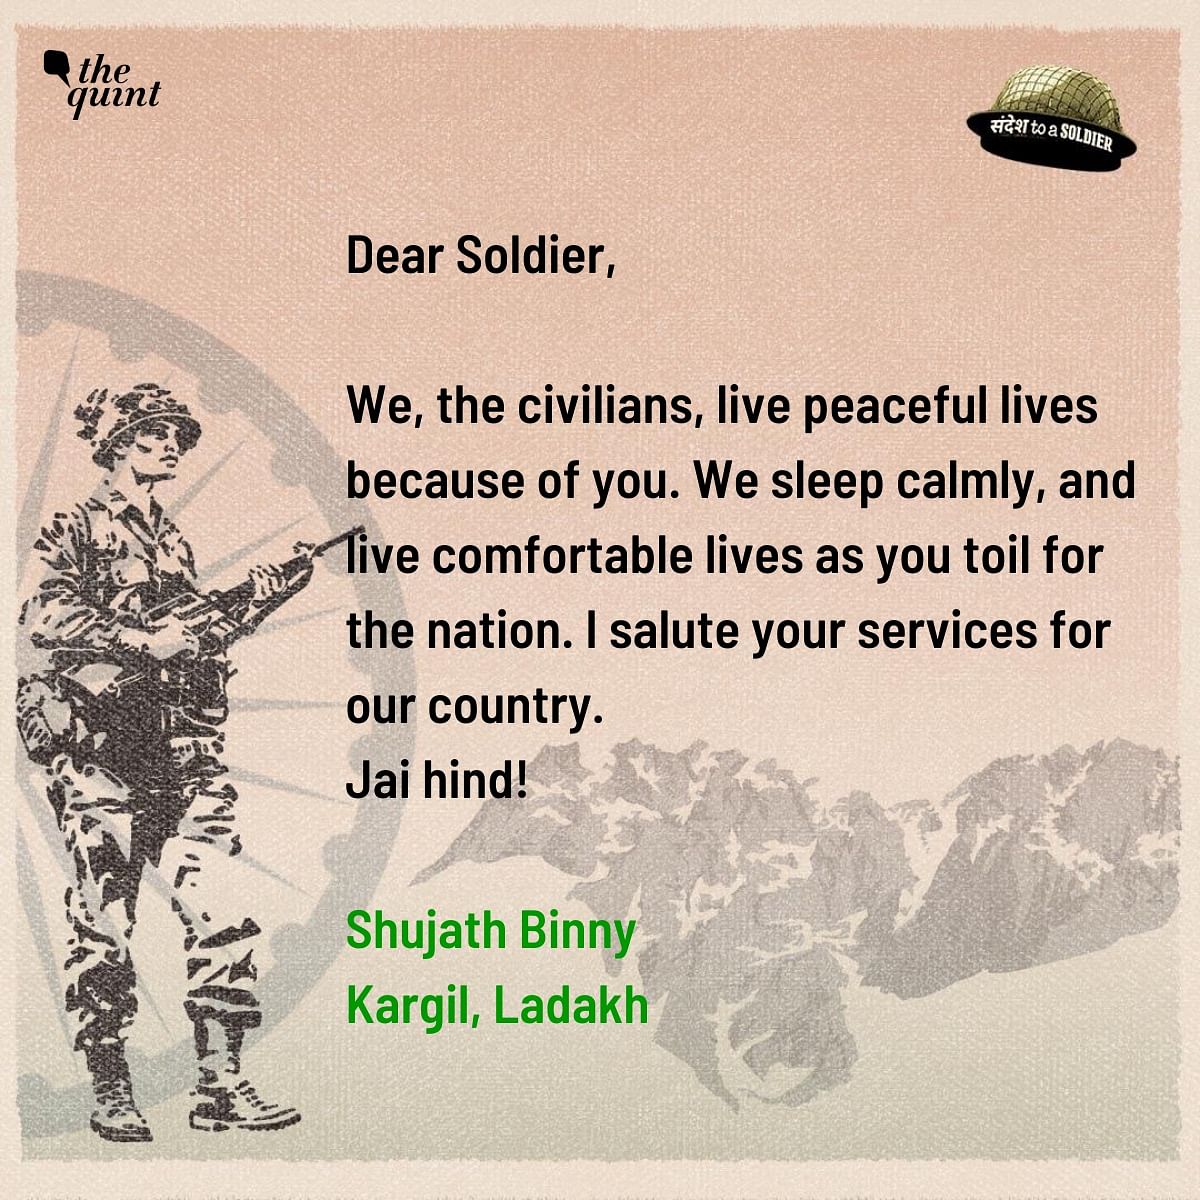 Citizens pen down their sandesh to a soldier, honouring their valour and selflessness.